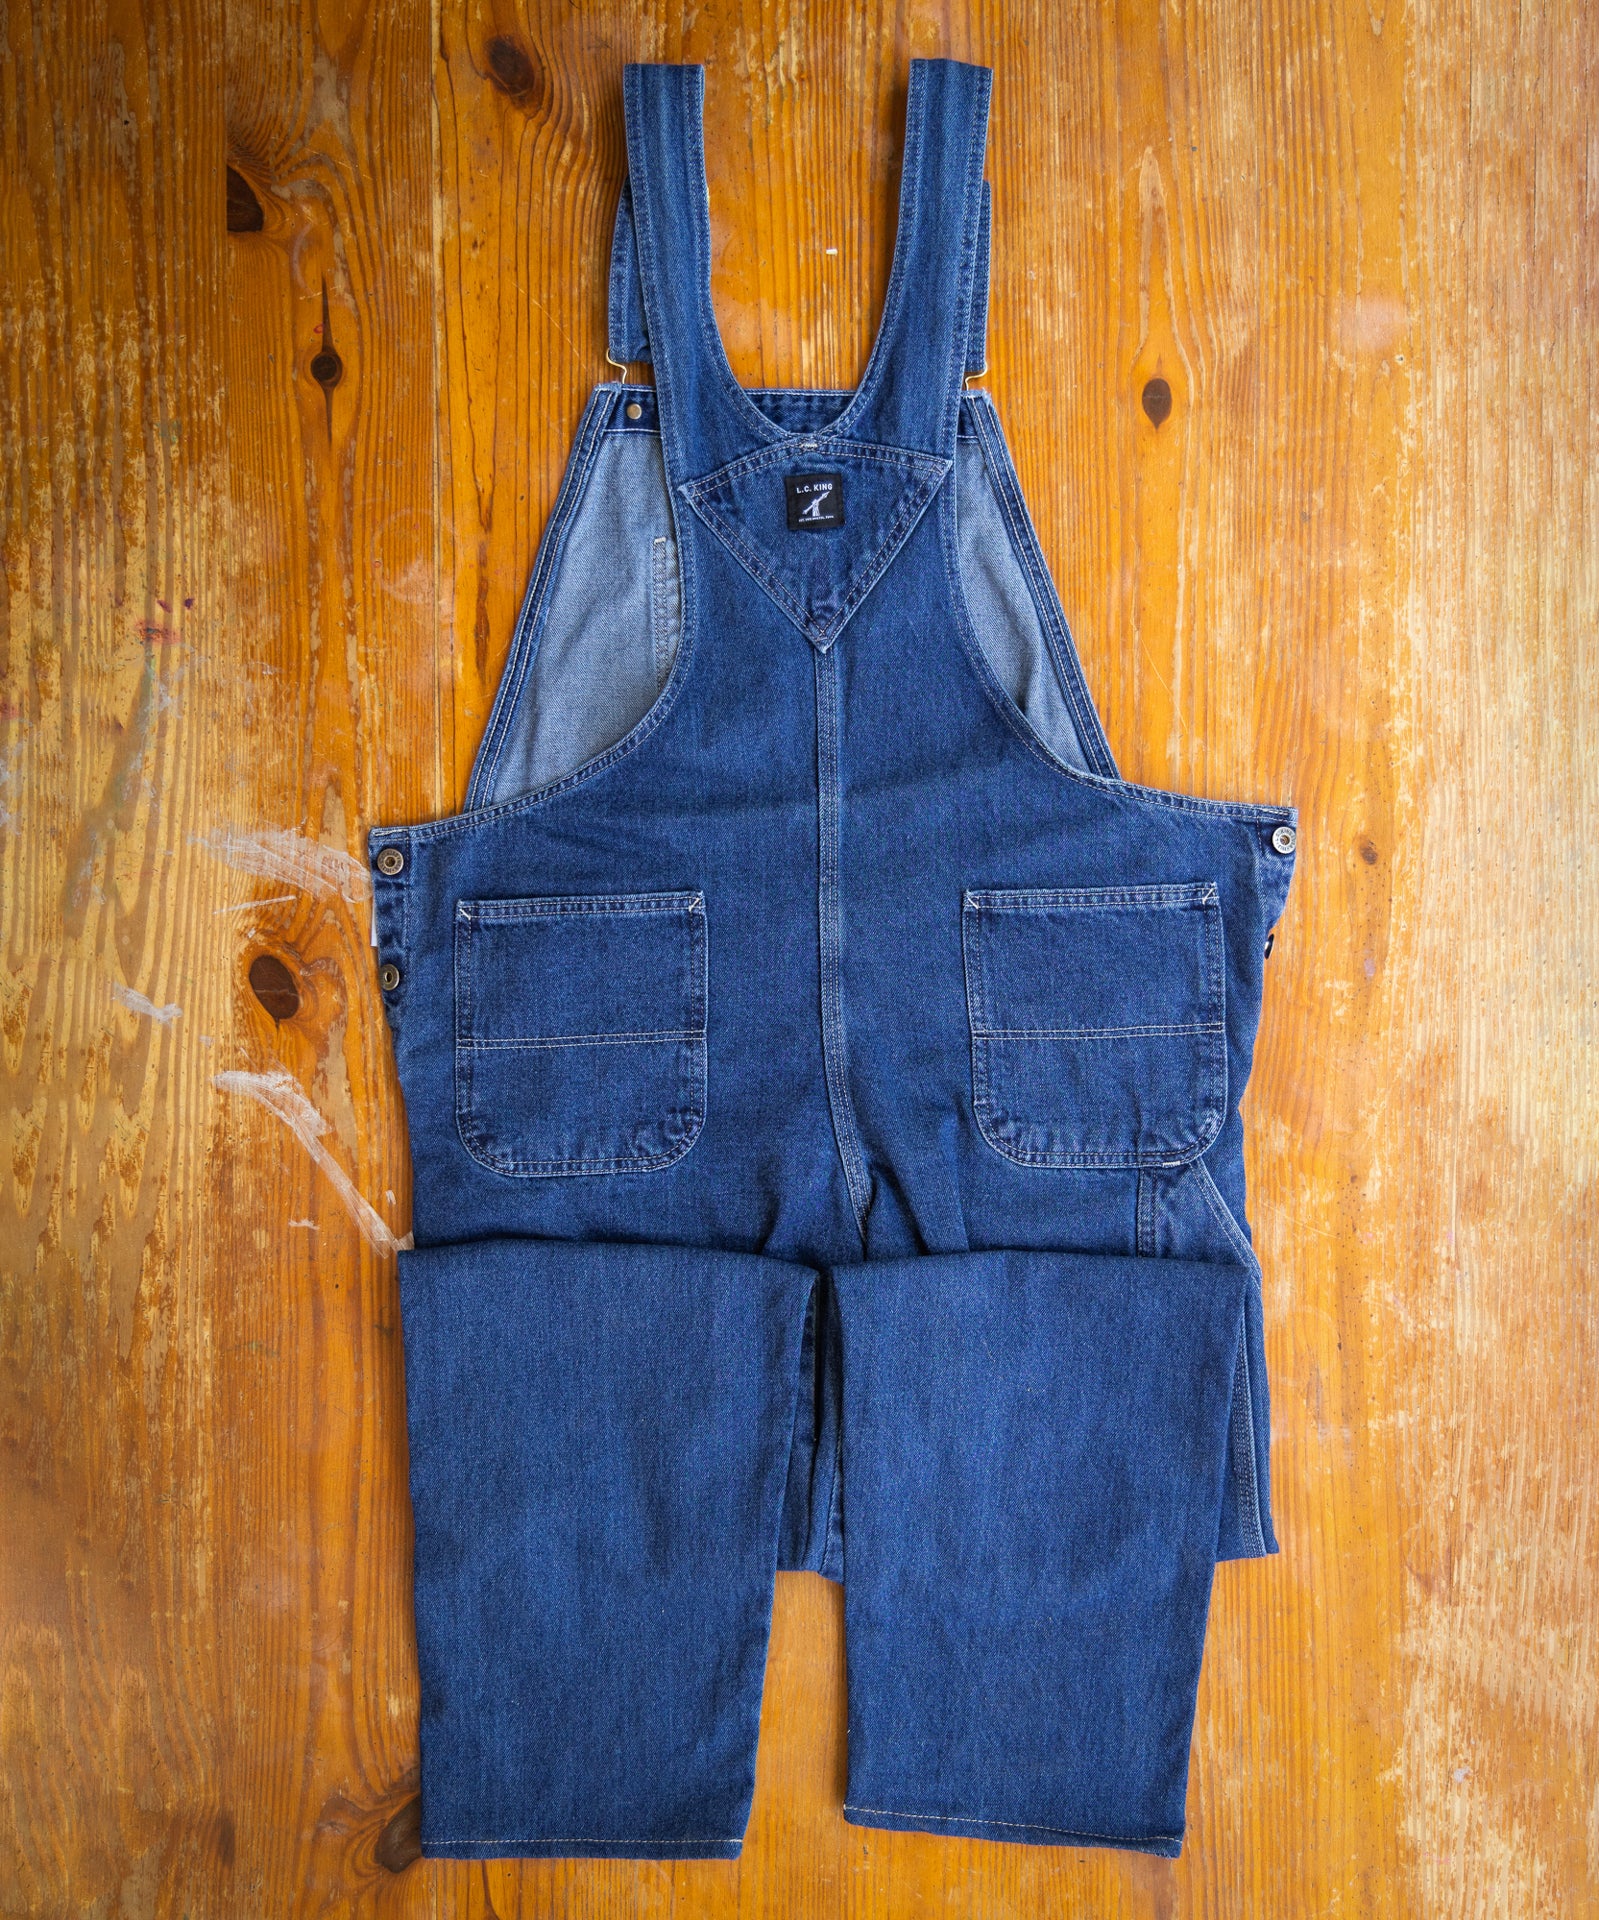 LC King Indigo Denim Tailored Fit High Back Overalls - Washed